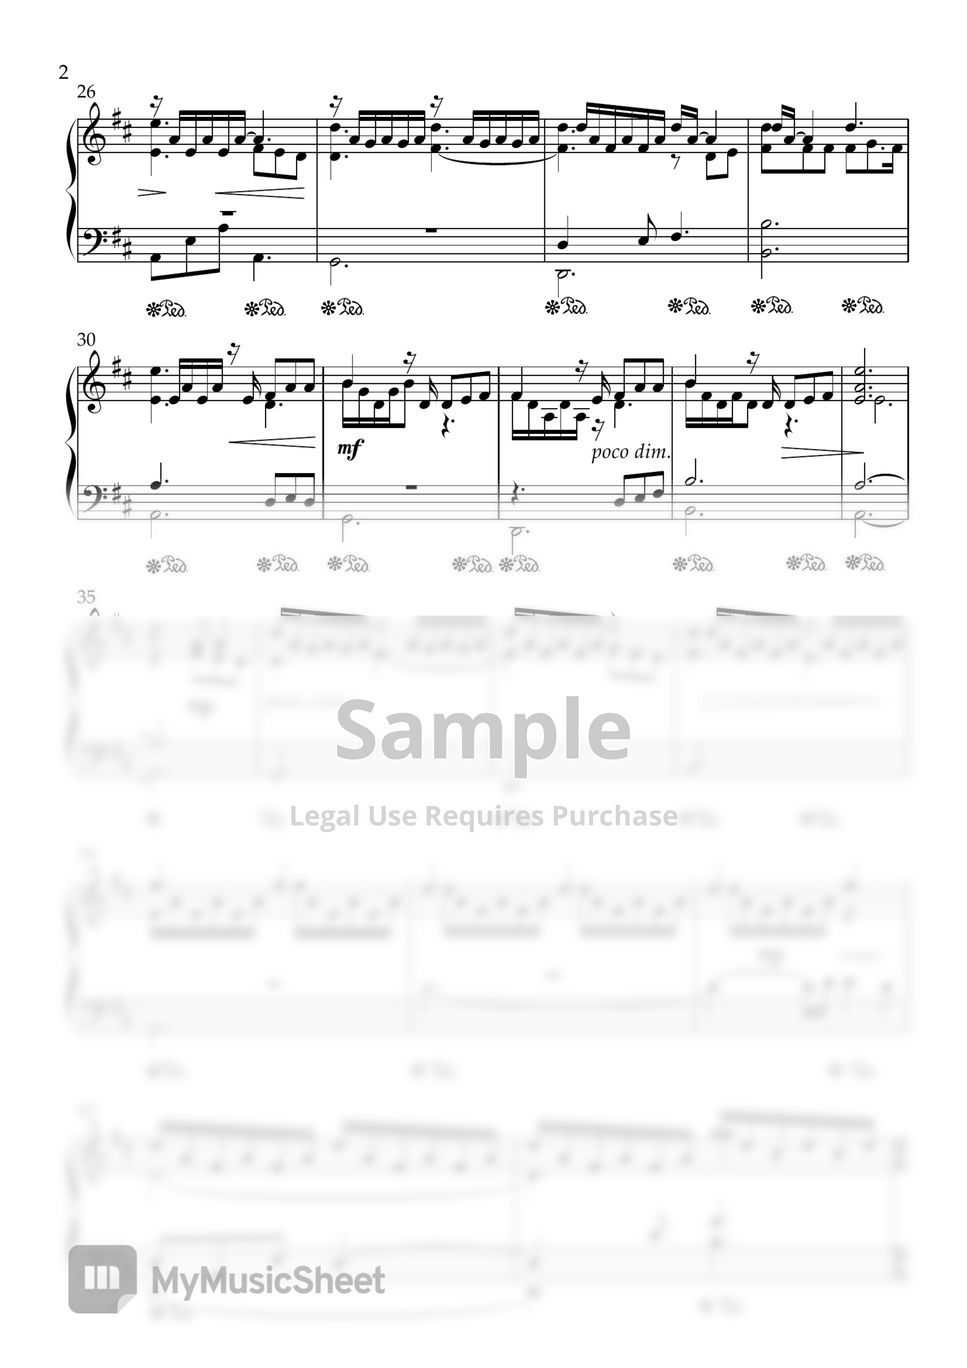 RUELLE - I Get To Love You (Piano Arrangement) Sheet by Edora MS